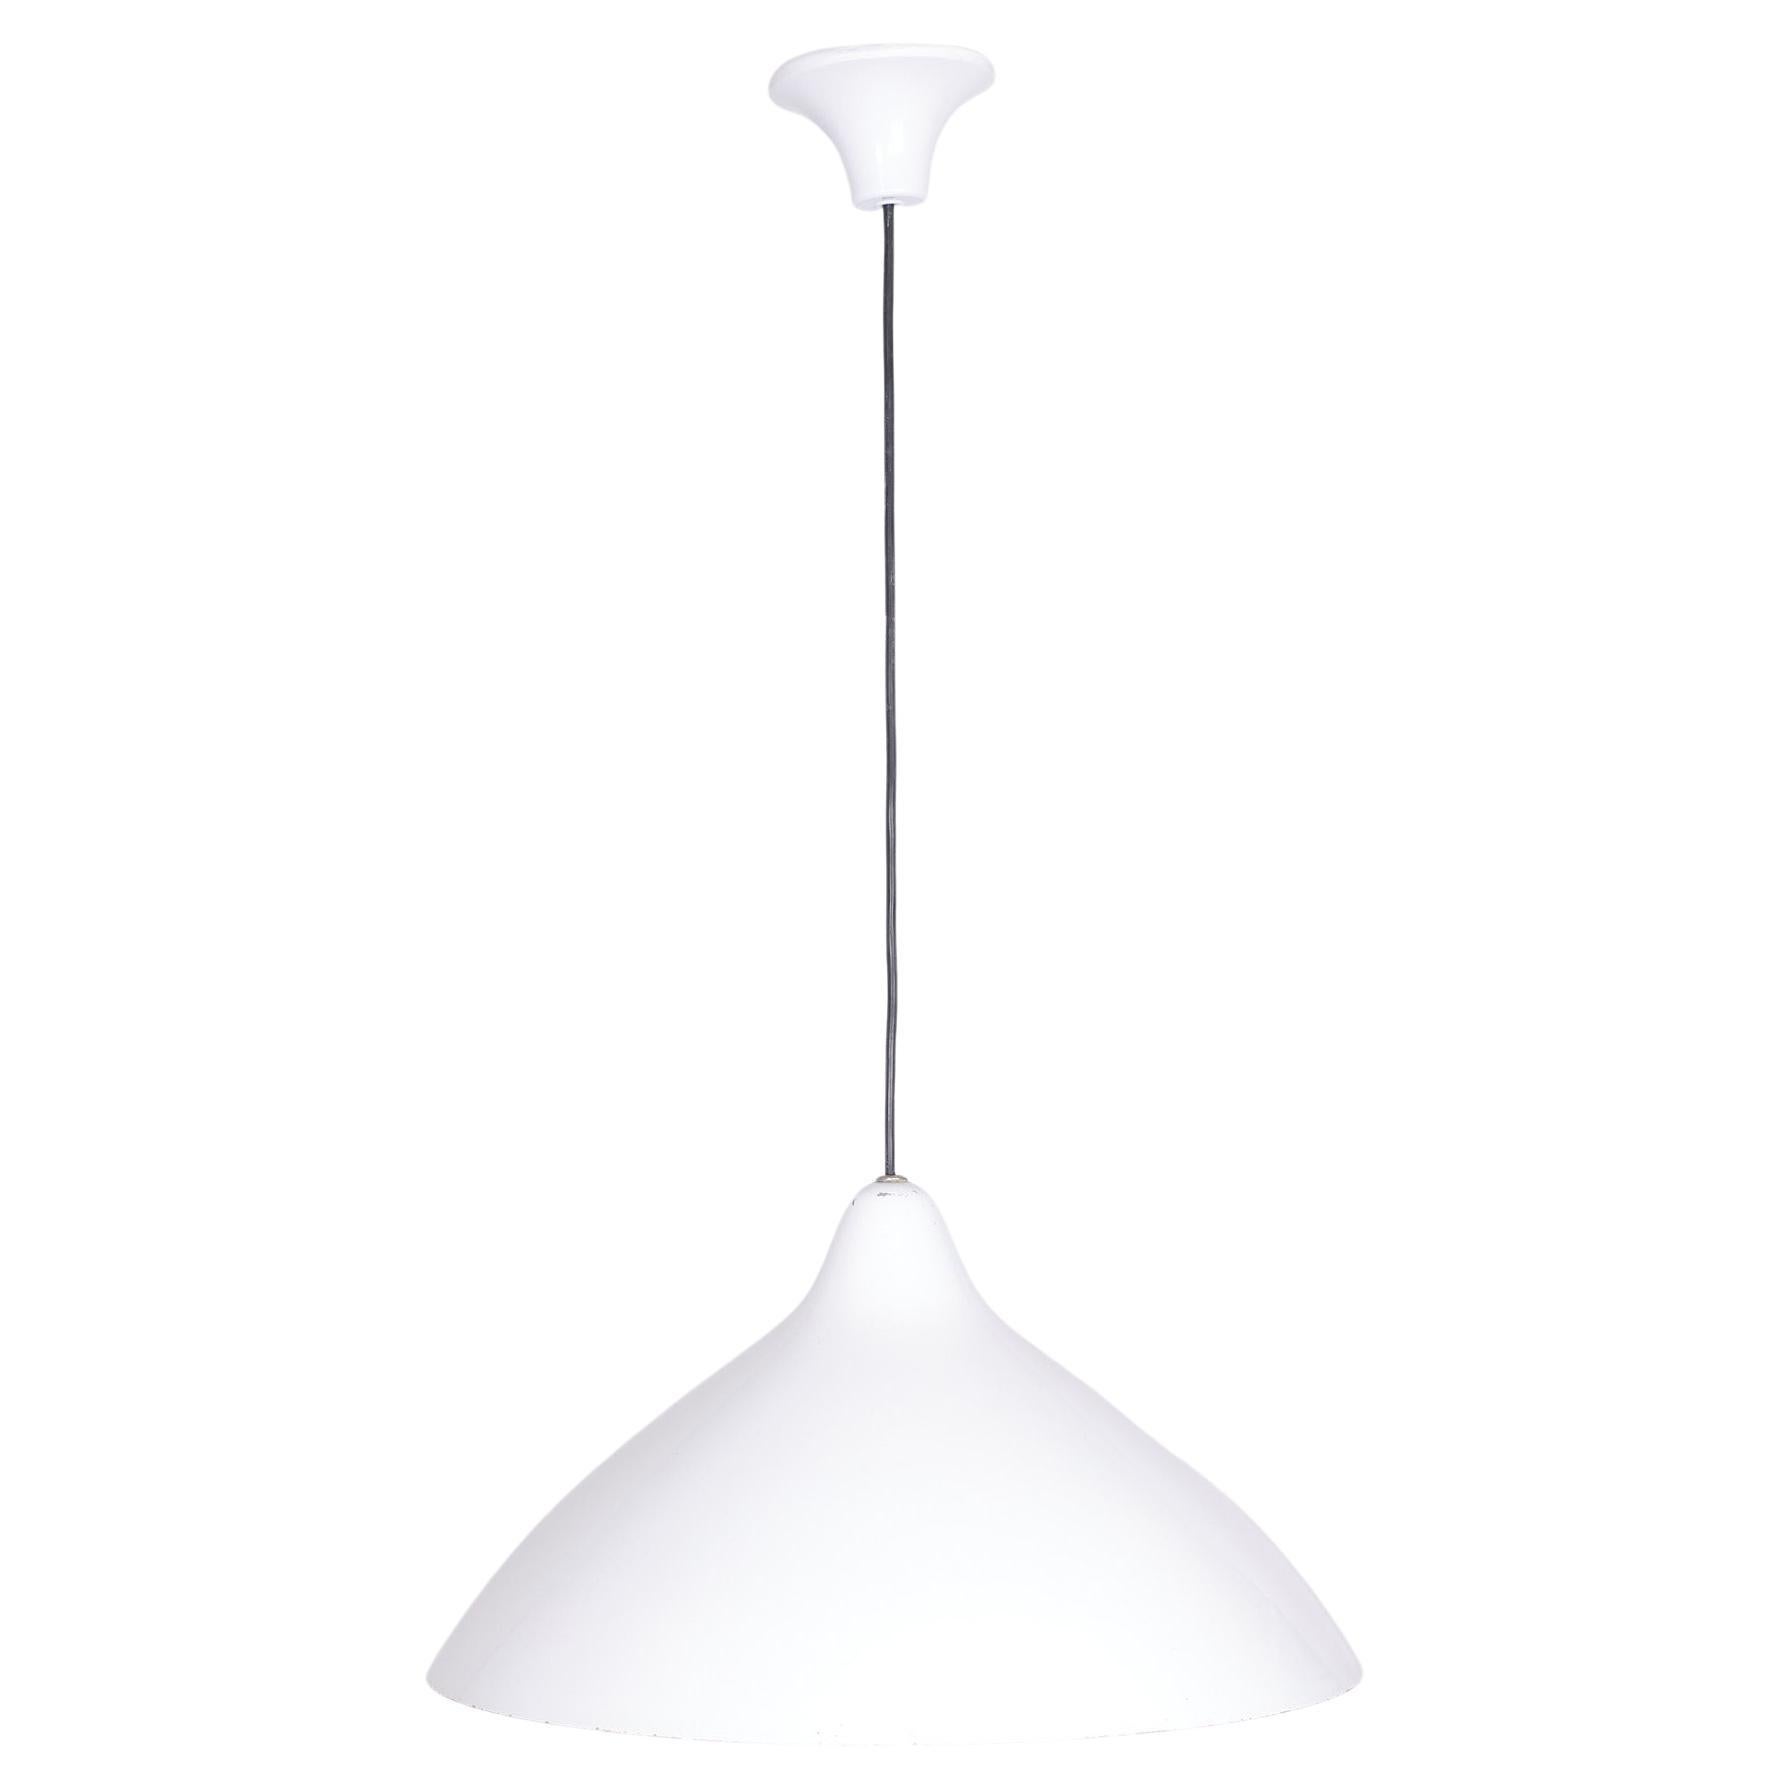  White Pendant Lamp by Lisa Johansson Pape for Orno, Finland 1950s  For Sale